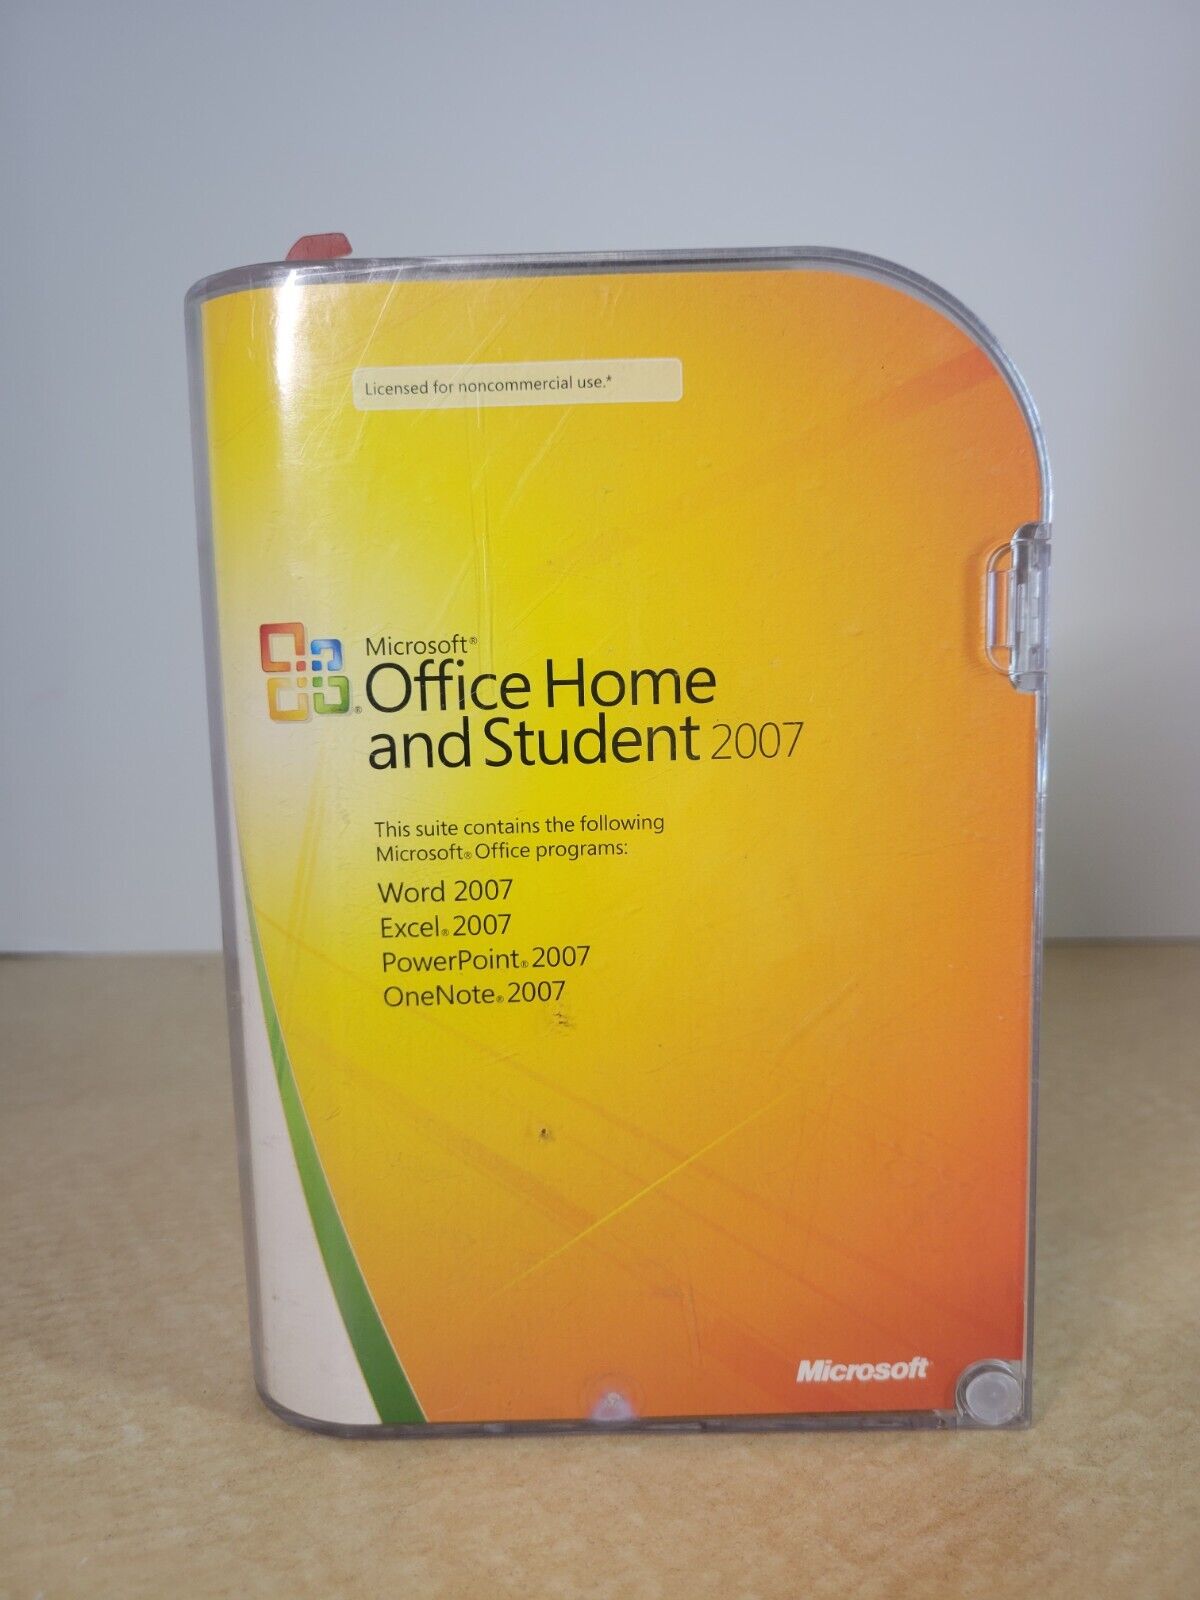 Microsoft Office Home and Student 2007 (79G-00007) w/key